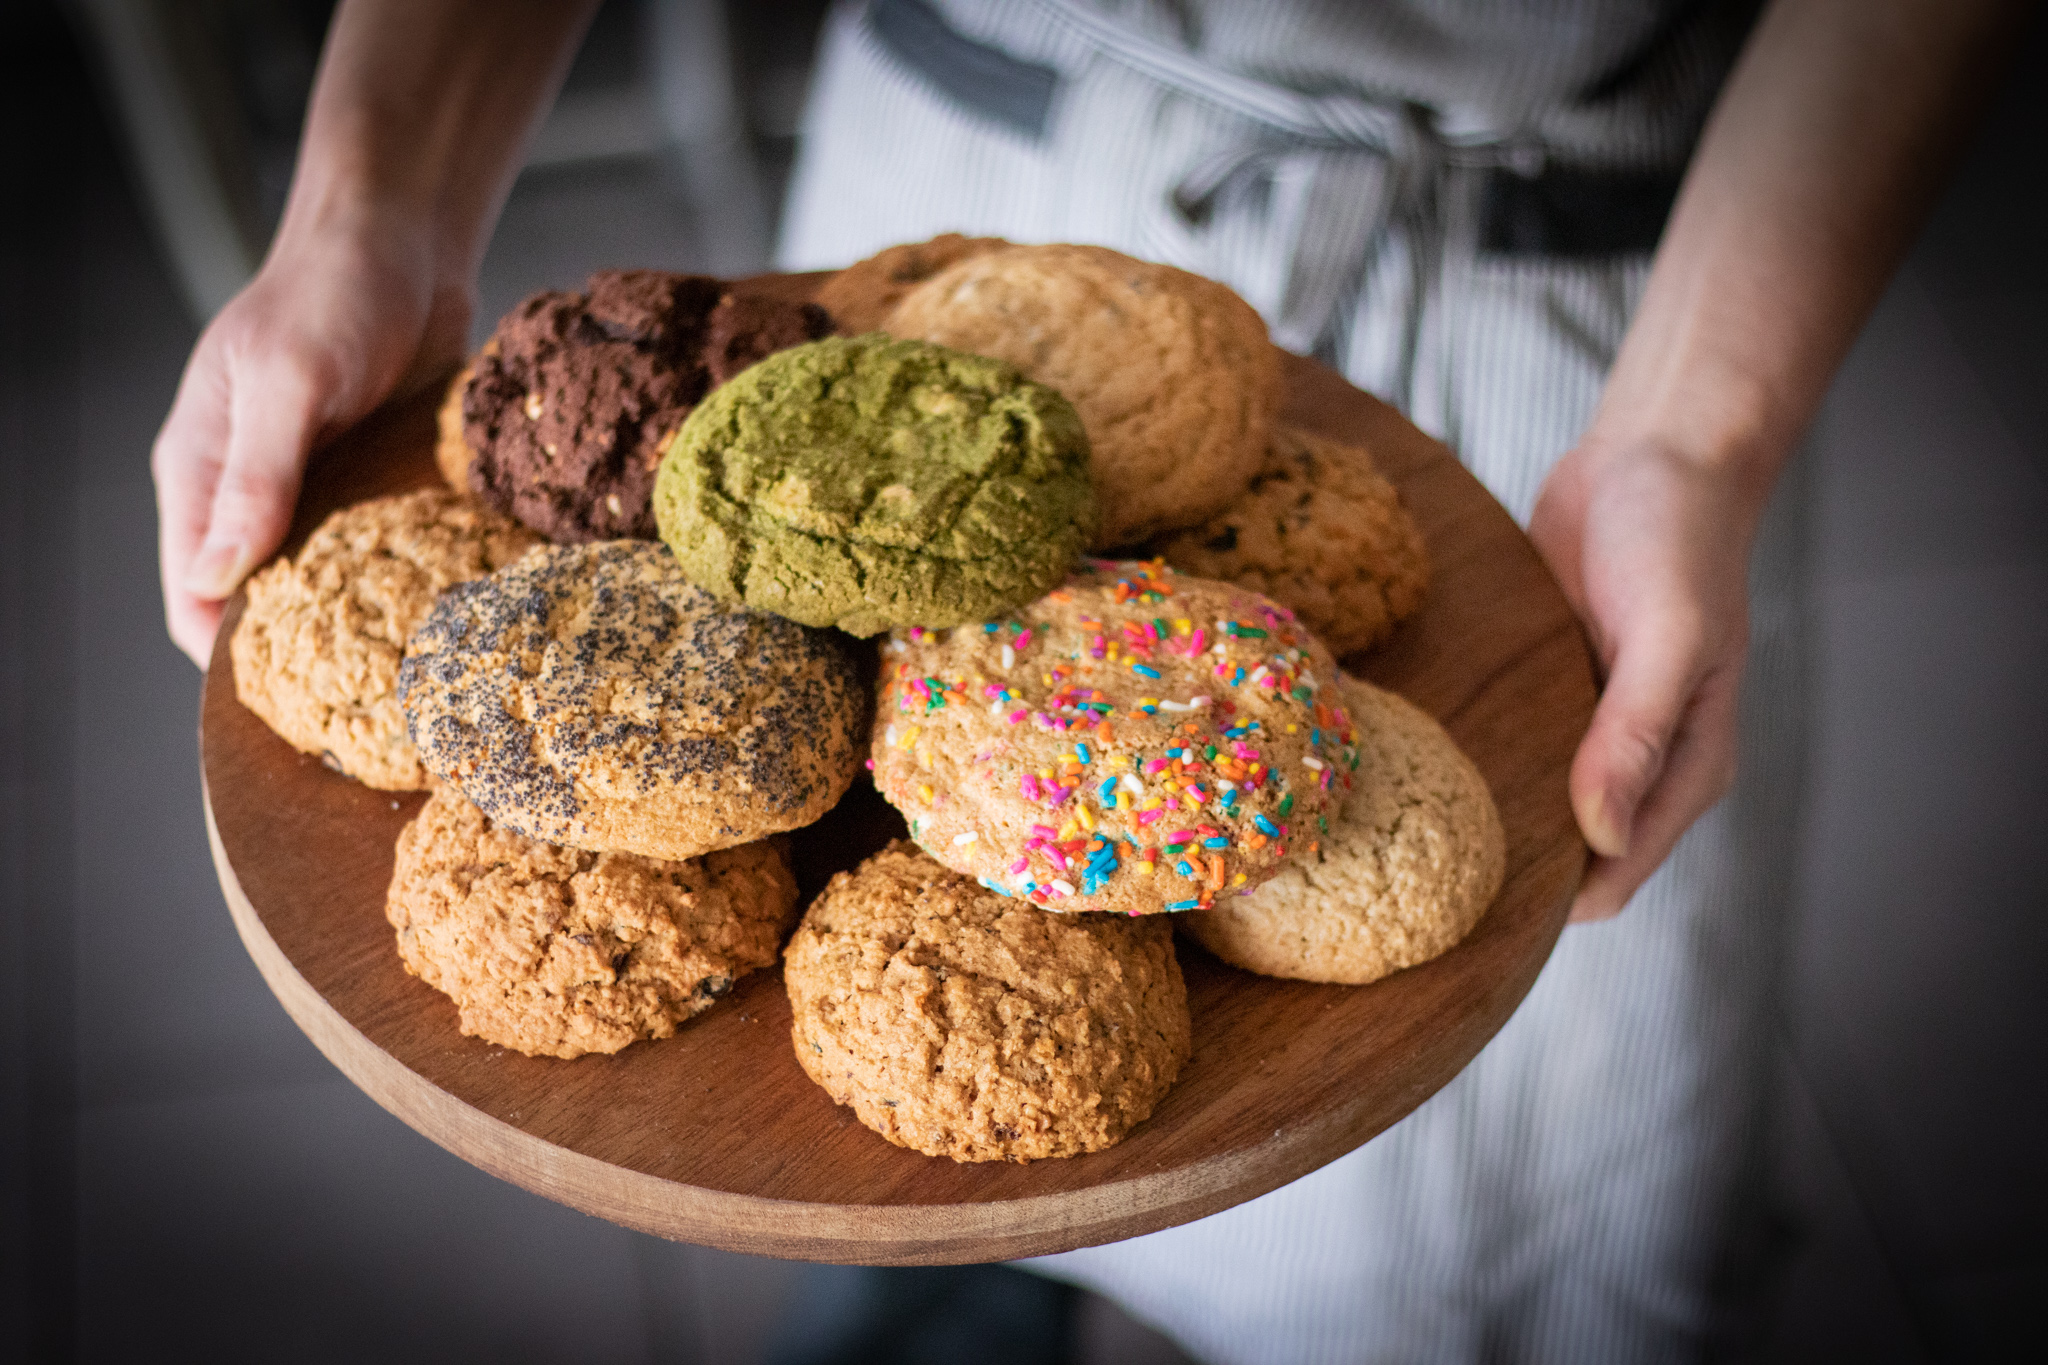 A platter with a variety of cookies.